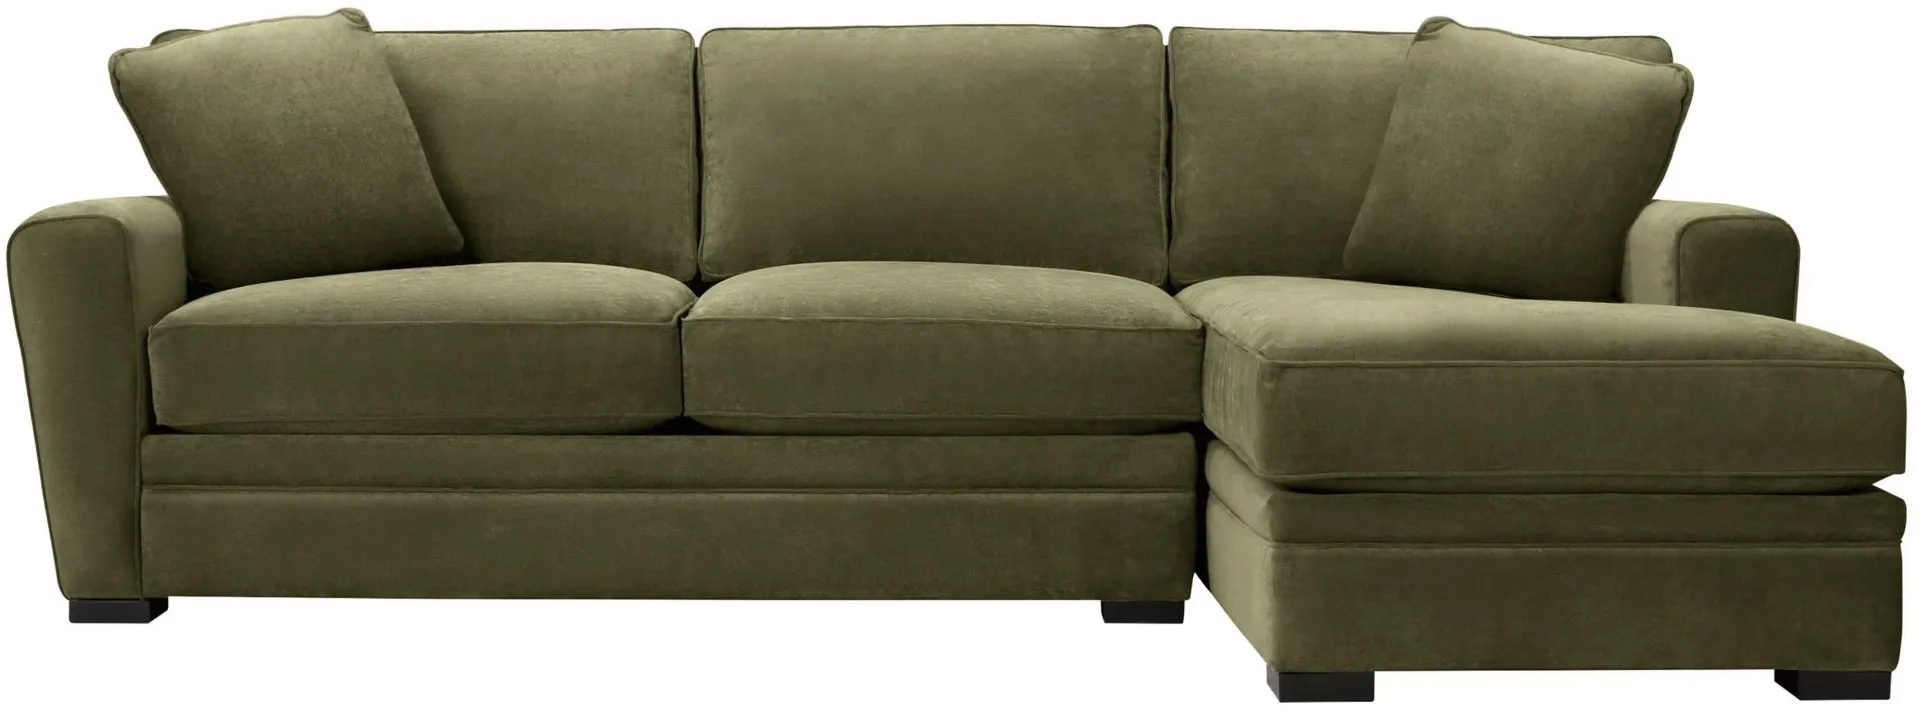 Artemis II 2-pc. Full Sleeper Right Hand Facing Sectional Sofa in Gypsy Sage by Jonathan Louis